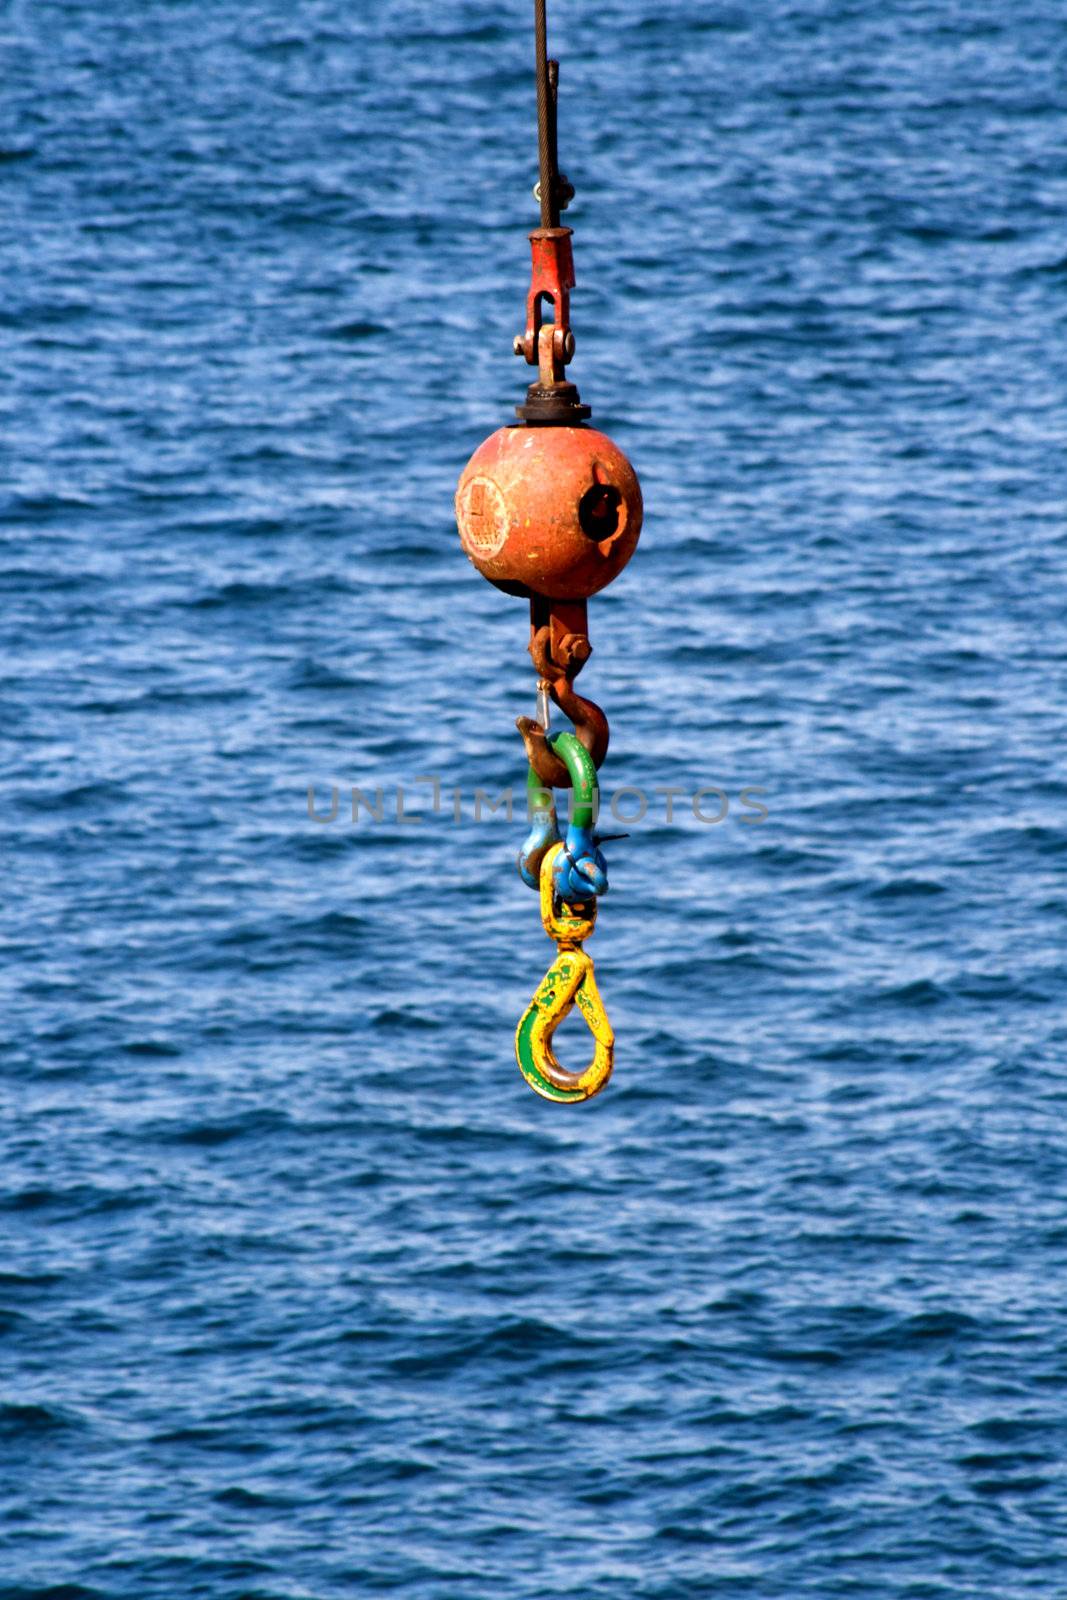 Construction Crane Hook and Wrecking Ball v1 is captured and set against the waters of Puget Sound.  This is a common piece of equipment at the Port of Seattle. 
